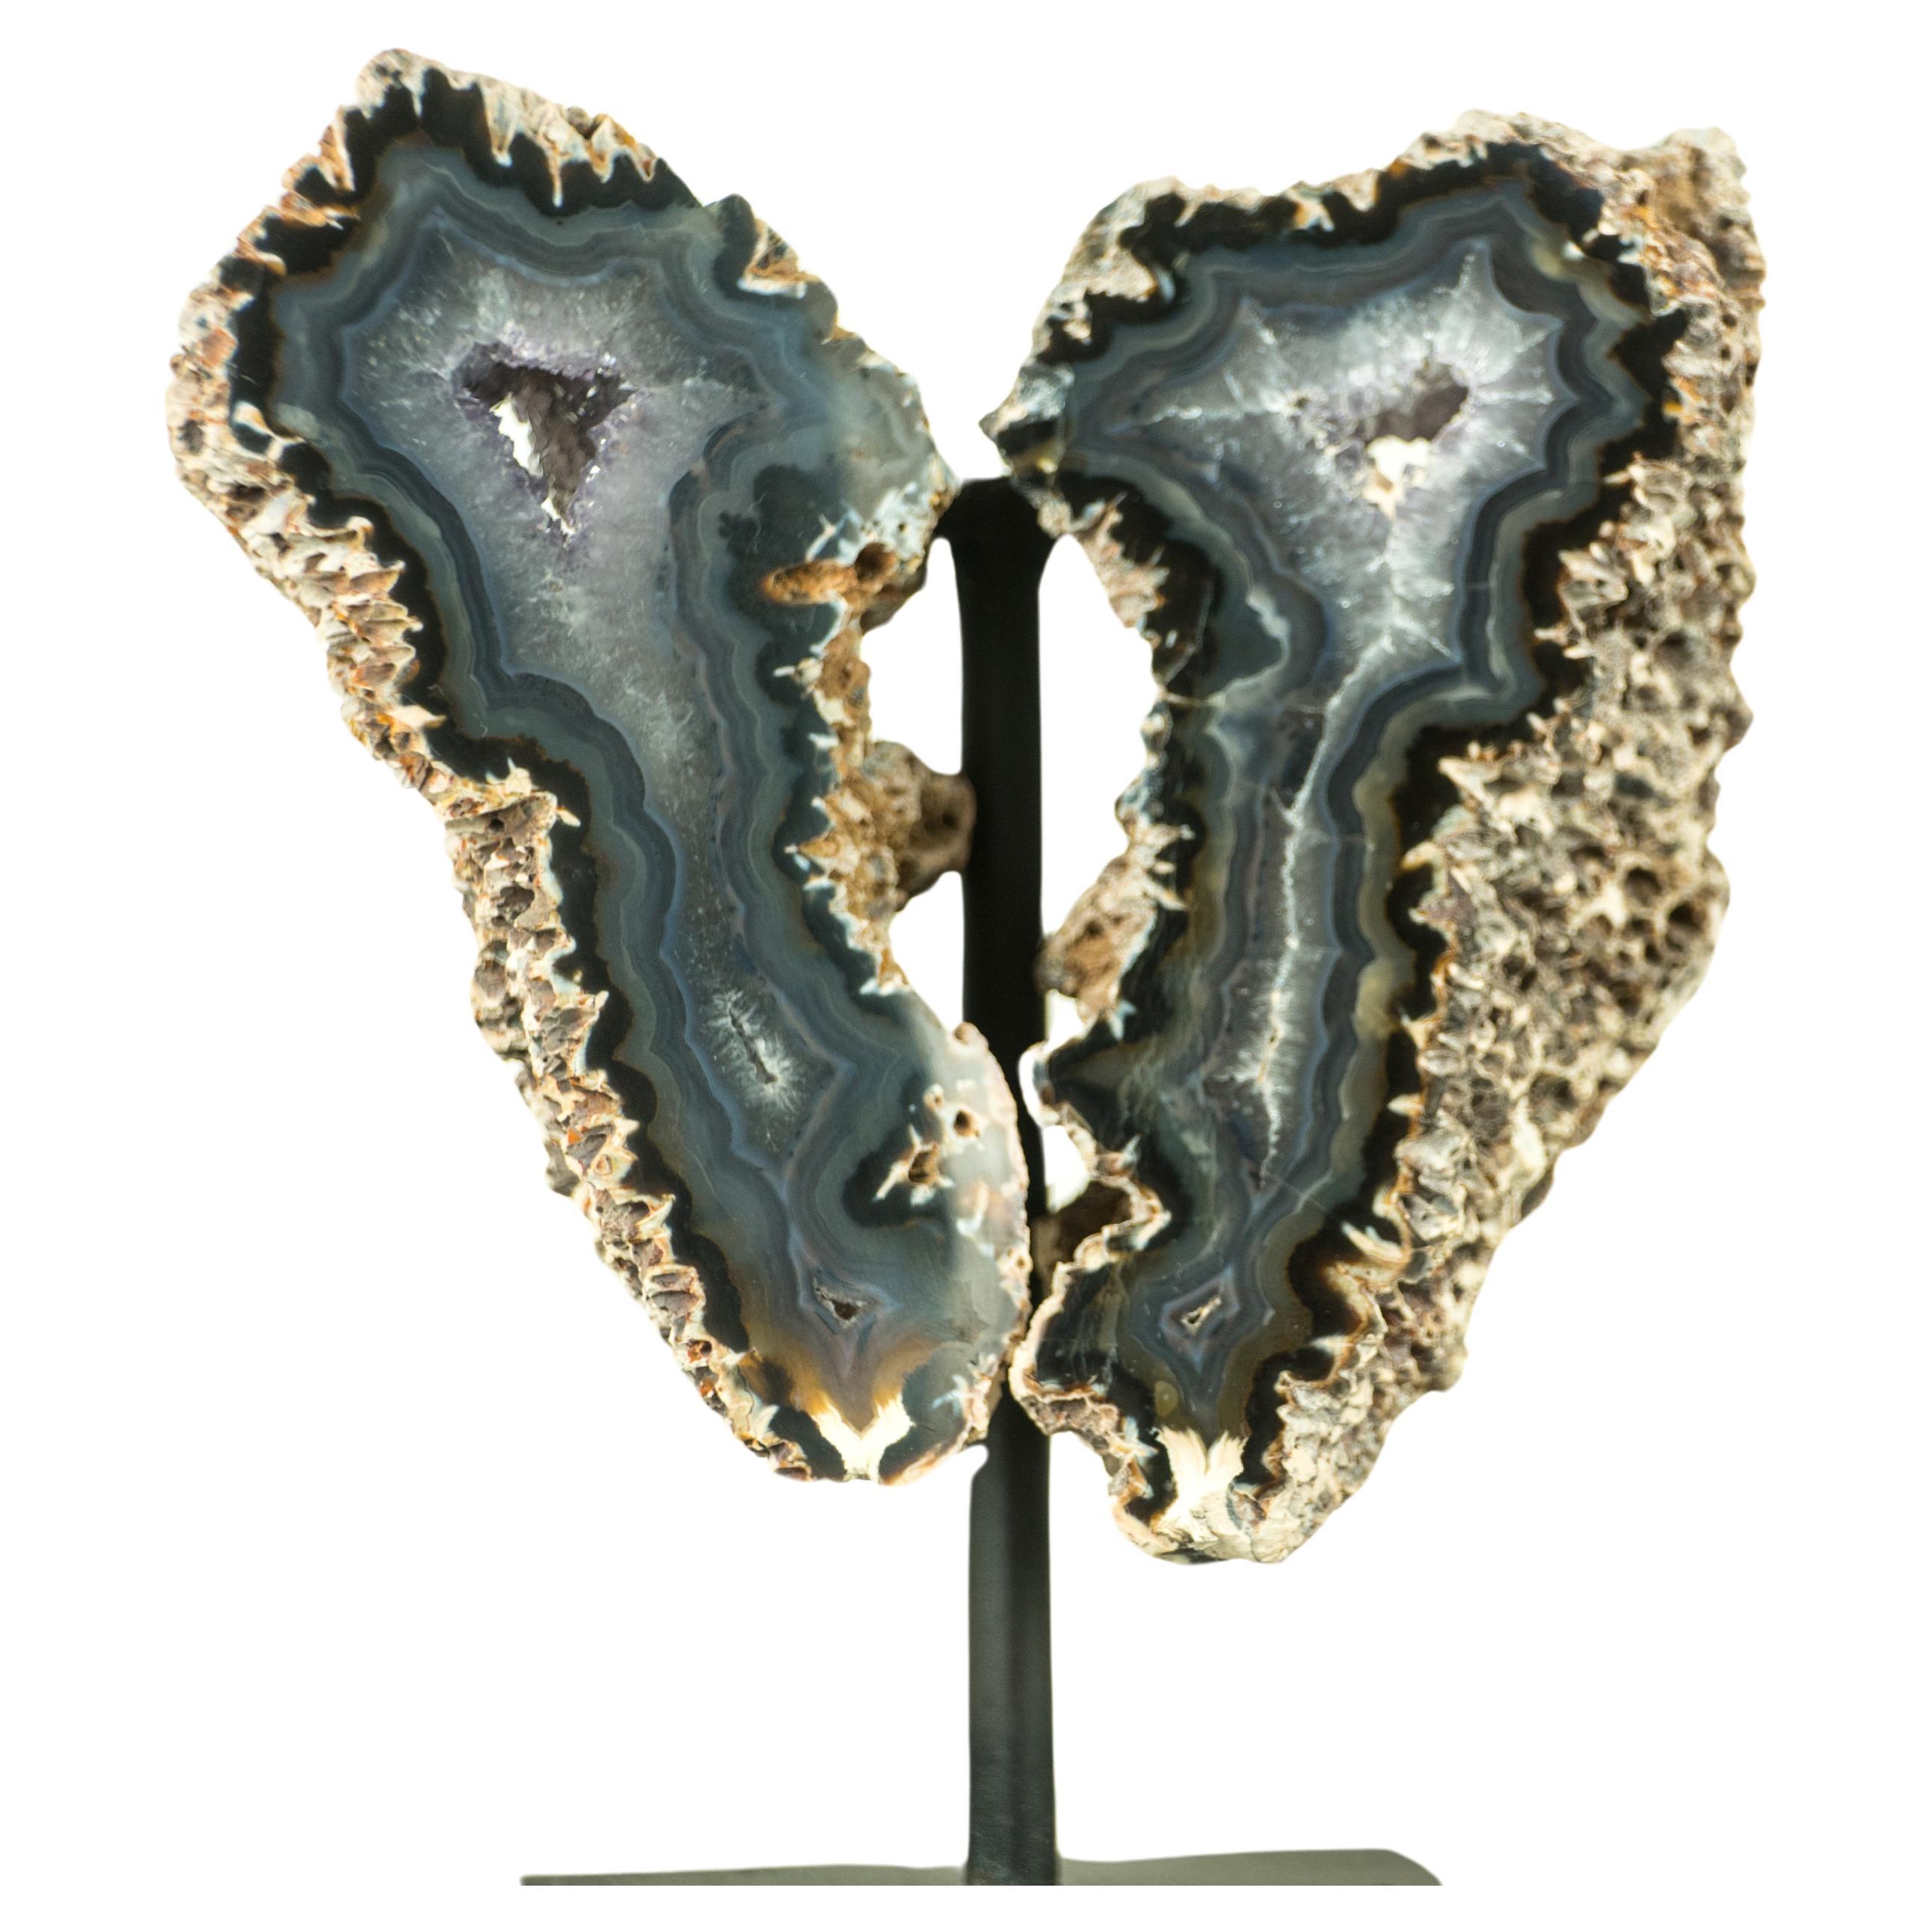 Small Spiky Lace Agate Geode with Druzy, in Butterfly Wings Format, Intact